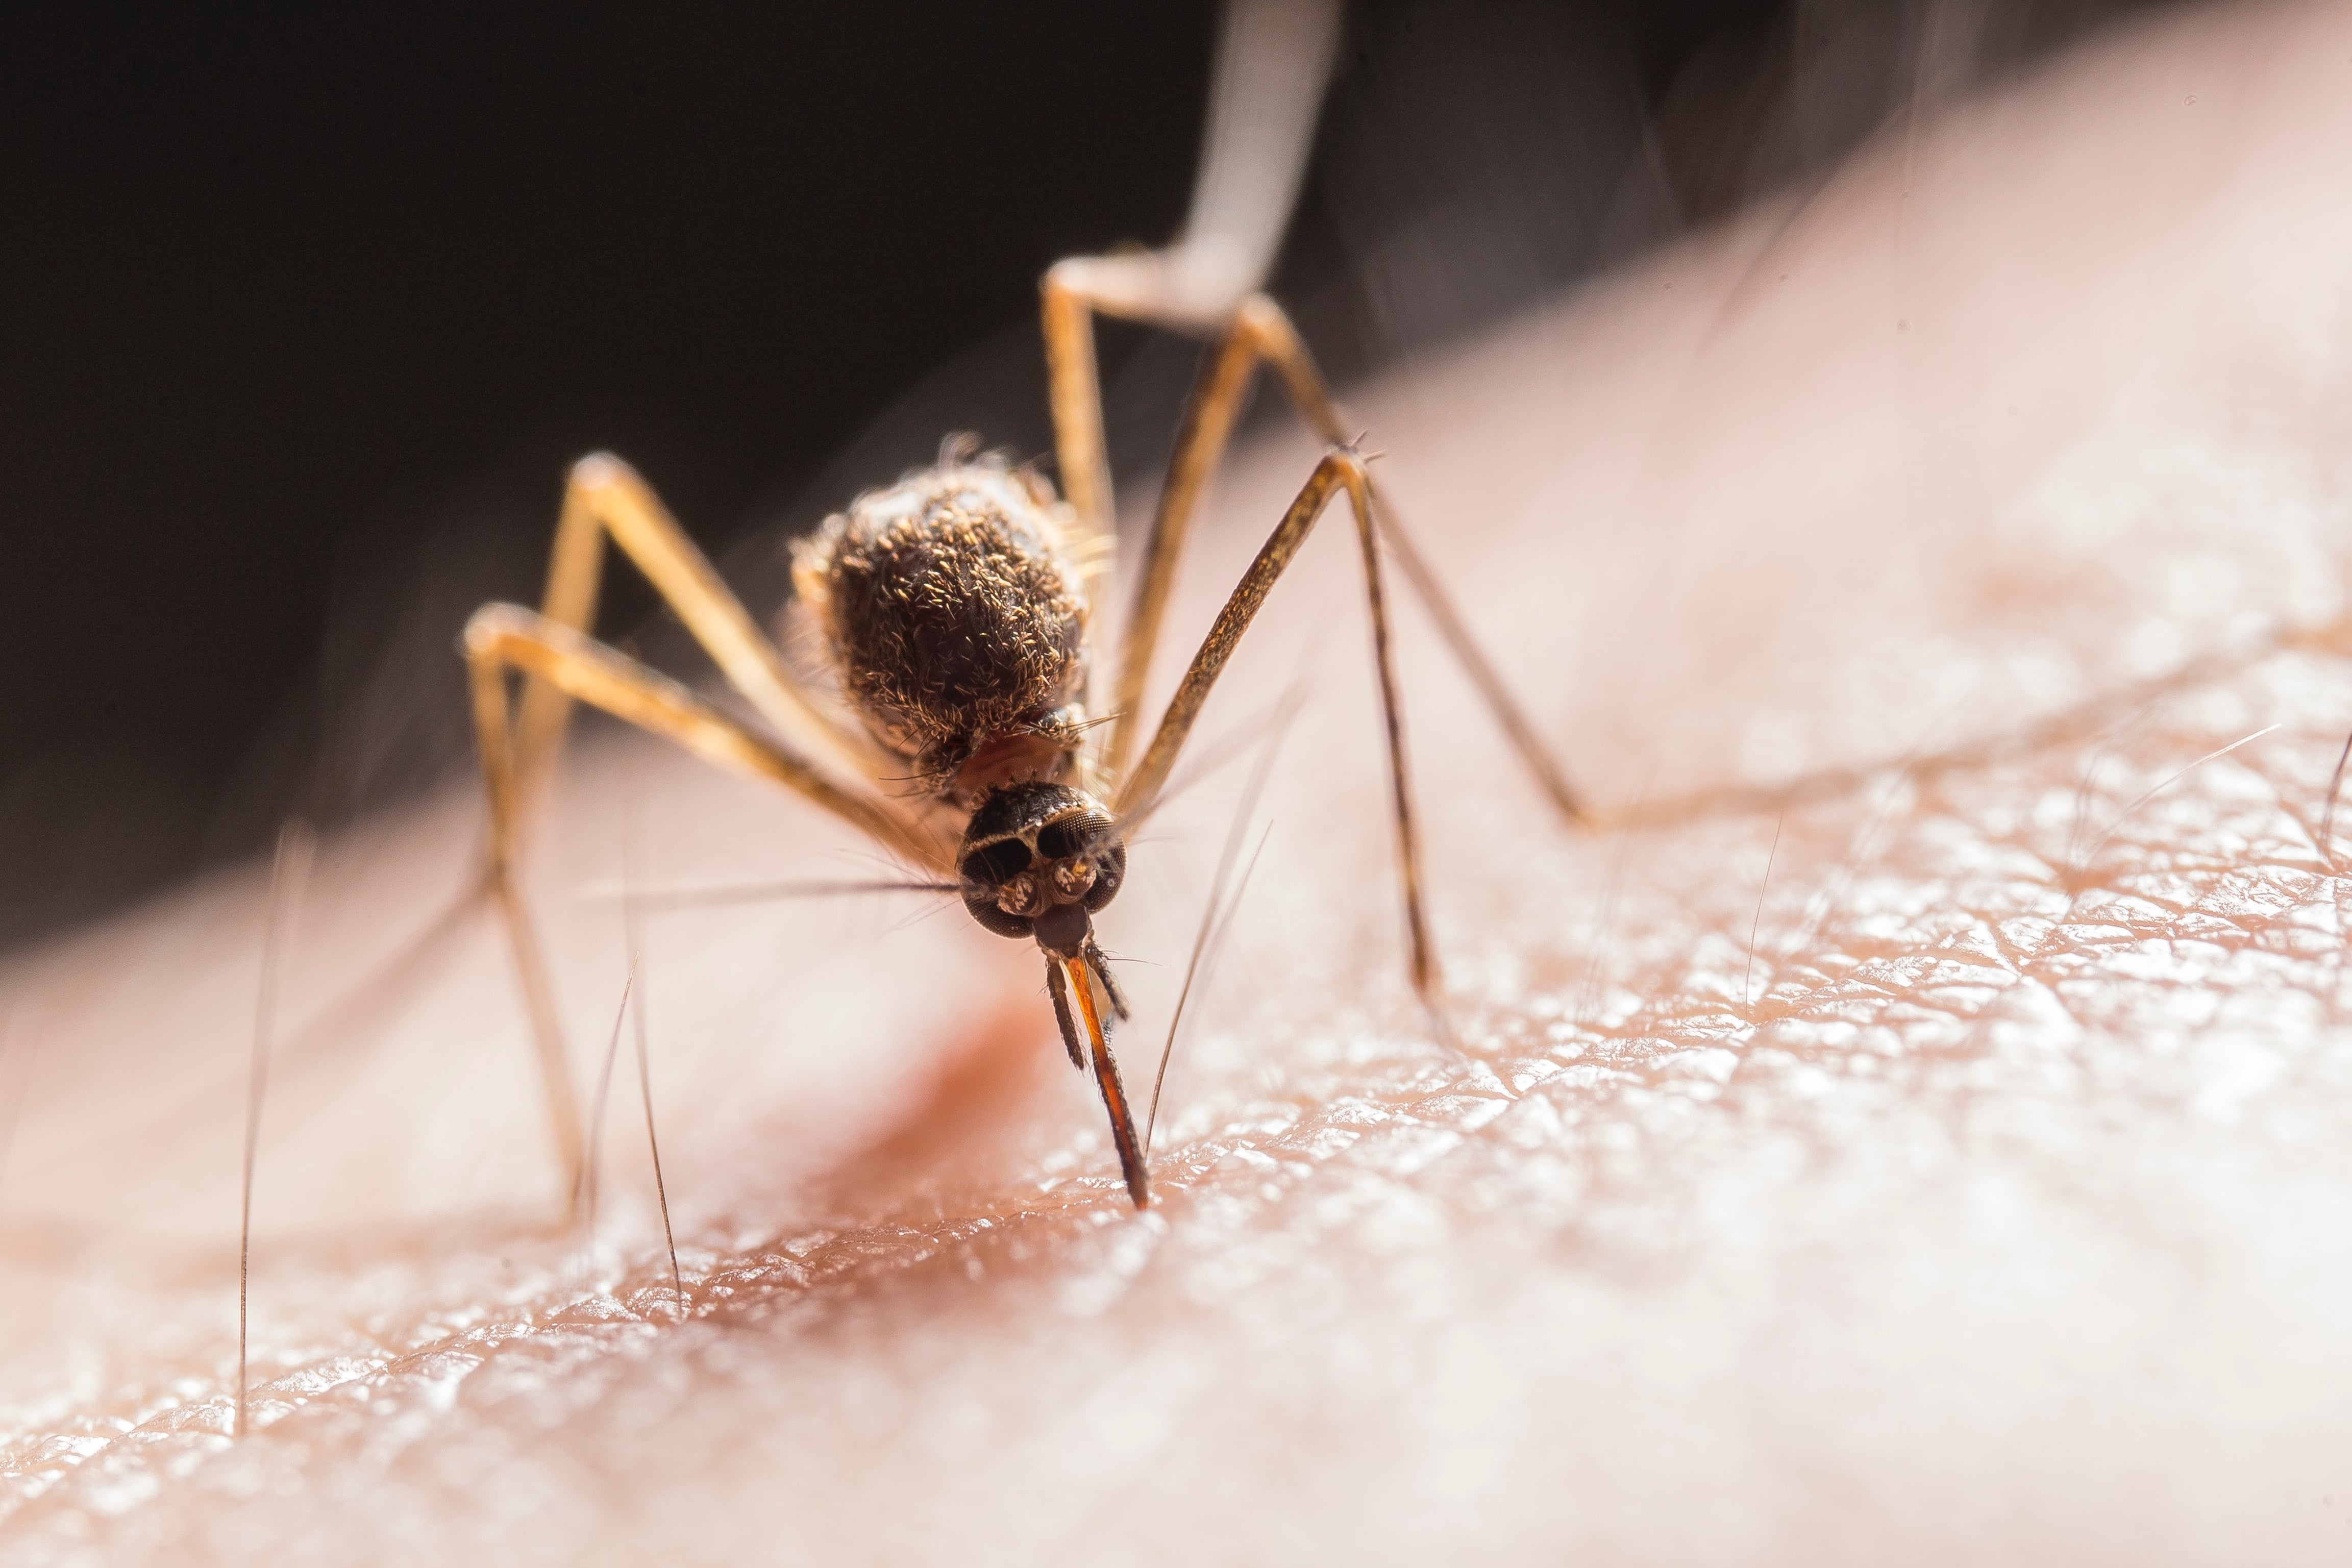 Malaria Is Spreading in Texas and Florida. Should You Be Concerned?